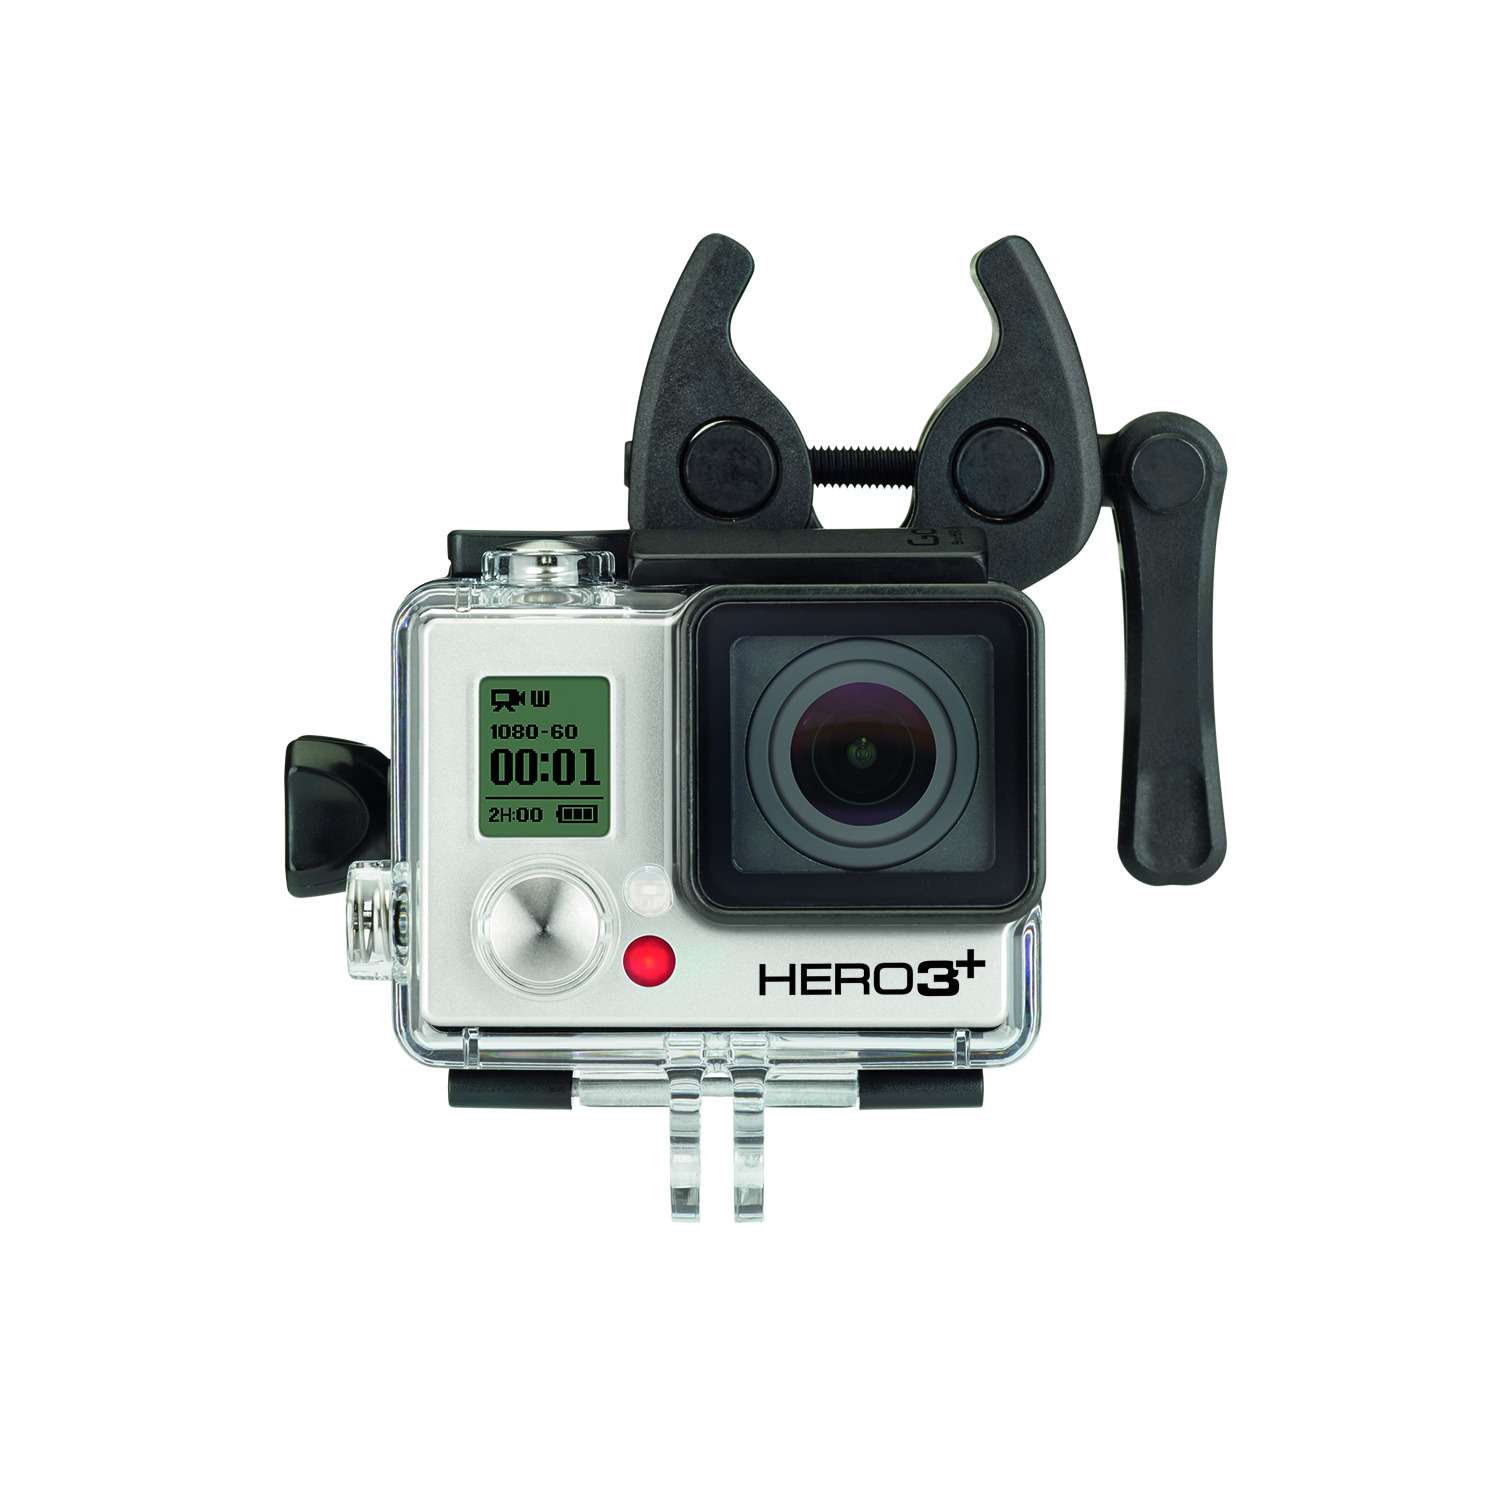 if you haven't gotten into the GoPro craze, you're missing out on capturing your best moments on the water. If you have, you can now get a new perspective on casts, hooksets and fish jumps at the boat with the Sportsman's Mount. It's ideal for placing on a rod.